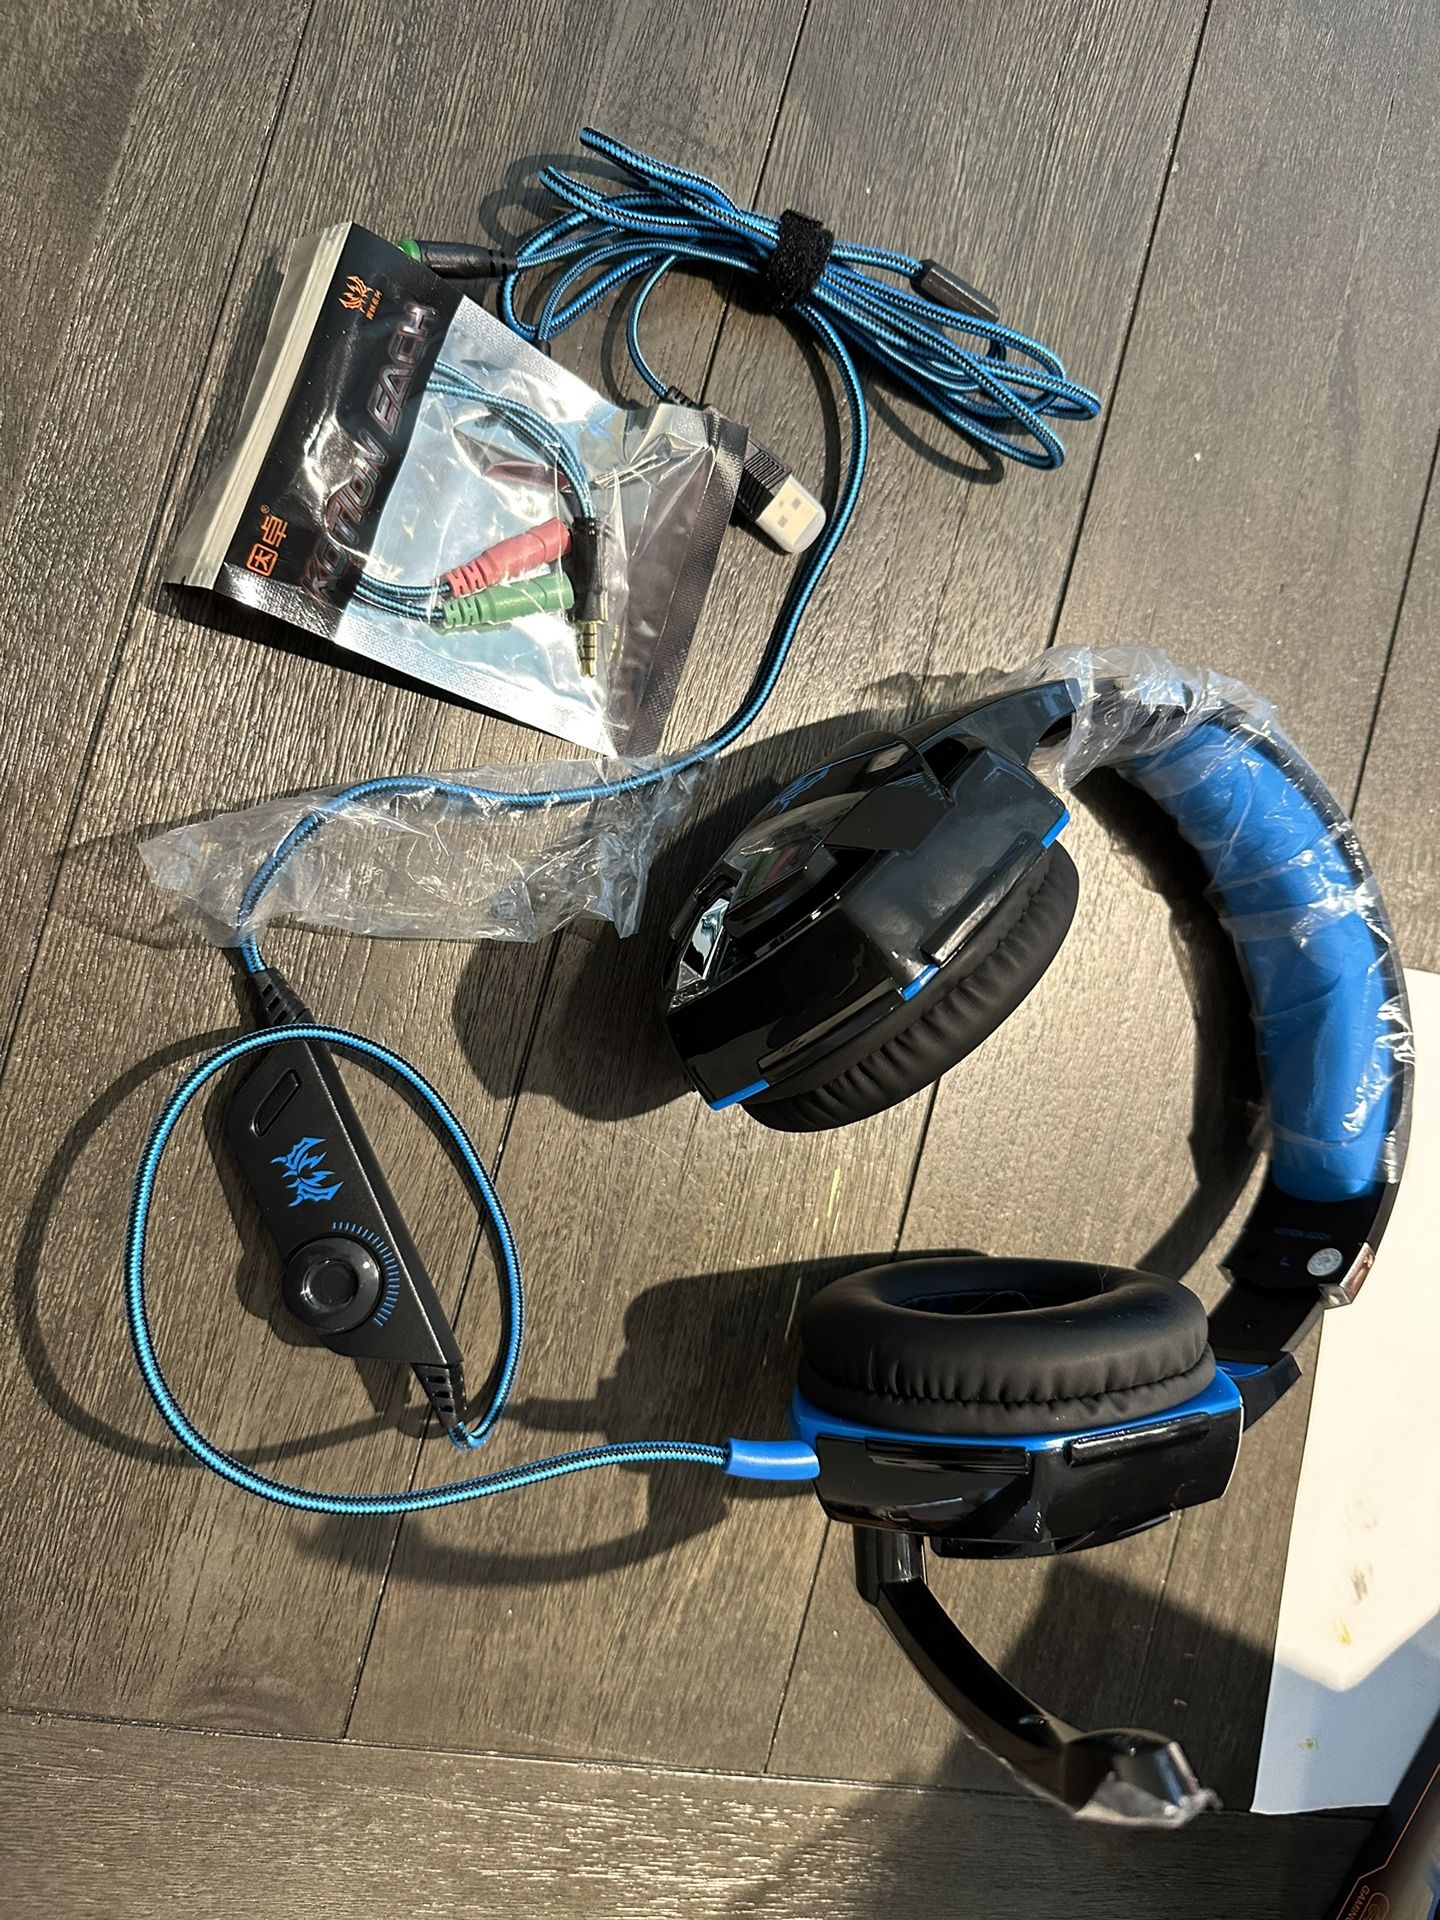 VersionTECH. G2000 Gaming Headset, Bass Surround Gaming Headphones With Noise Cancelling Mic, LED Li